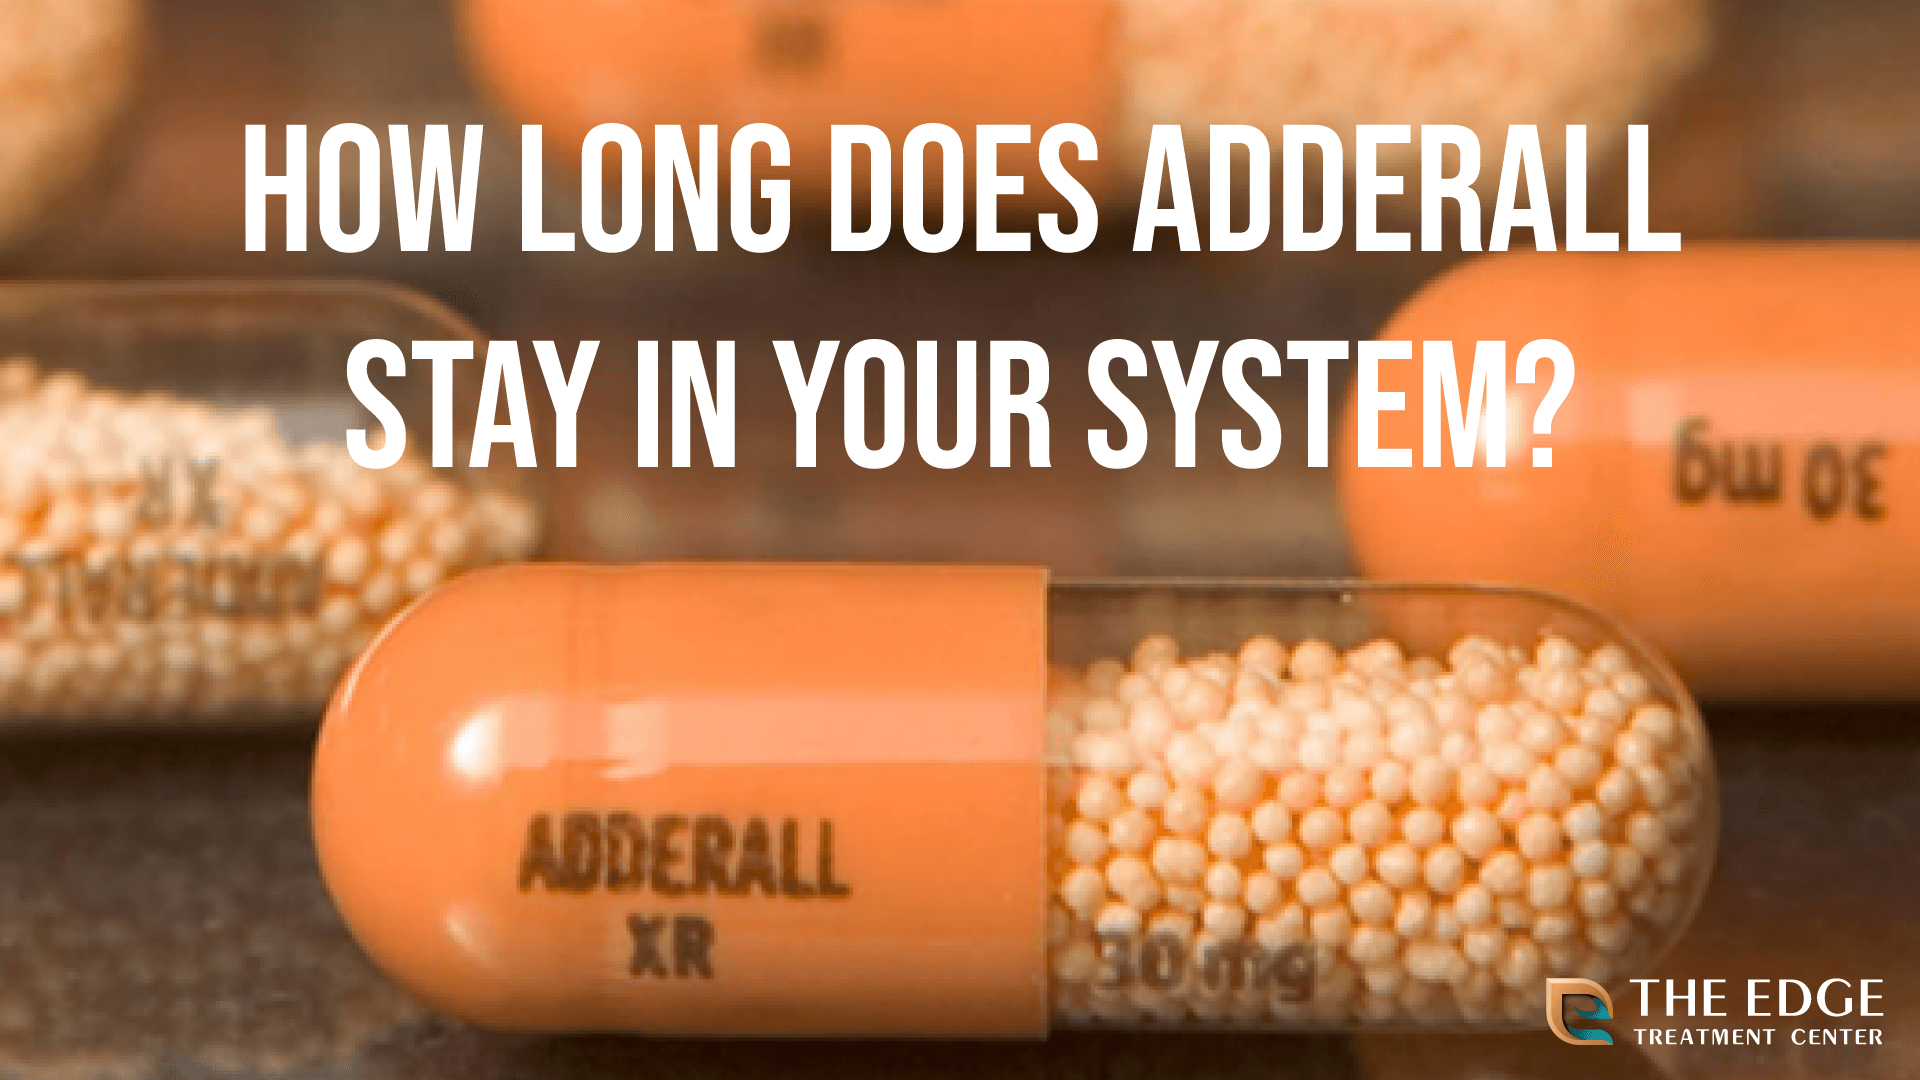 Modafinil Vs Adderall: Which Is More Beneficial?